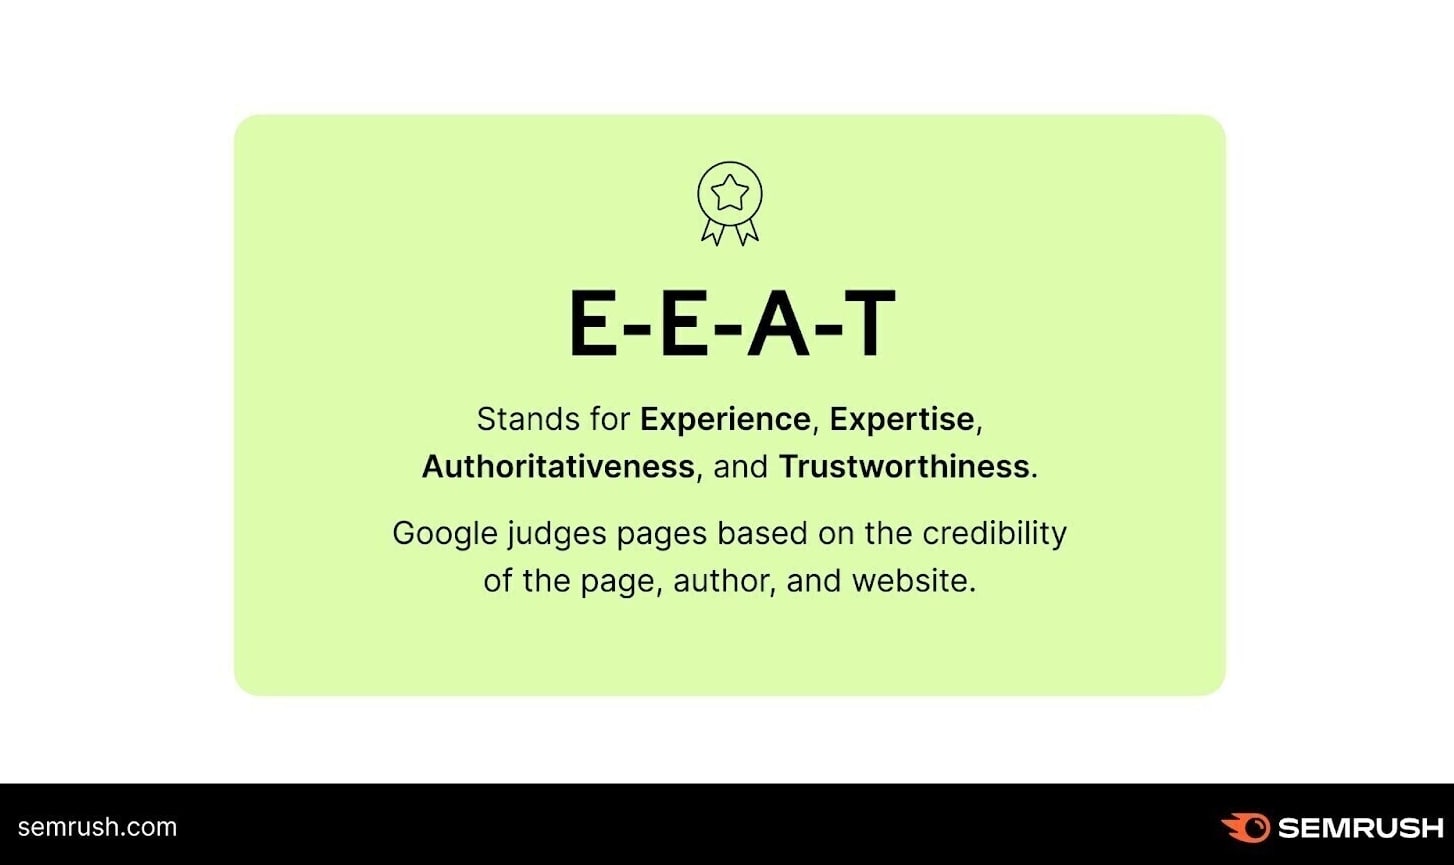 An infographic on what "E-E-A-T" stands for